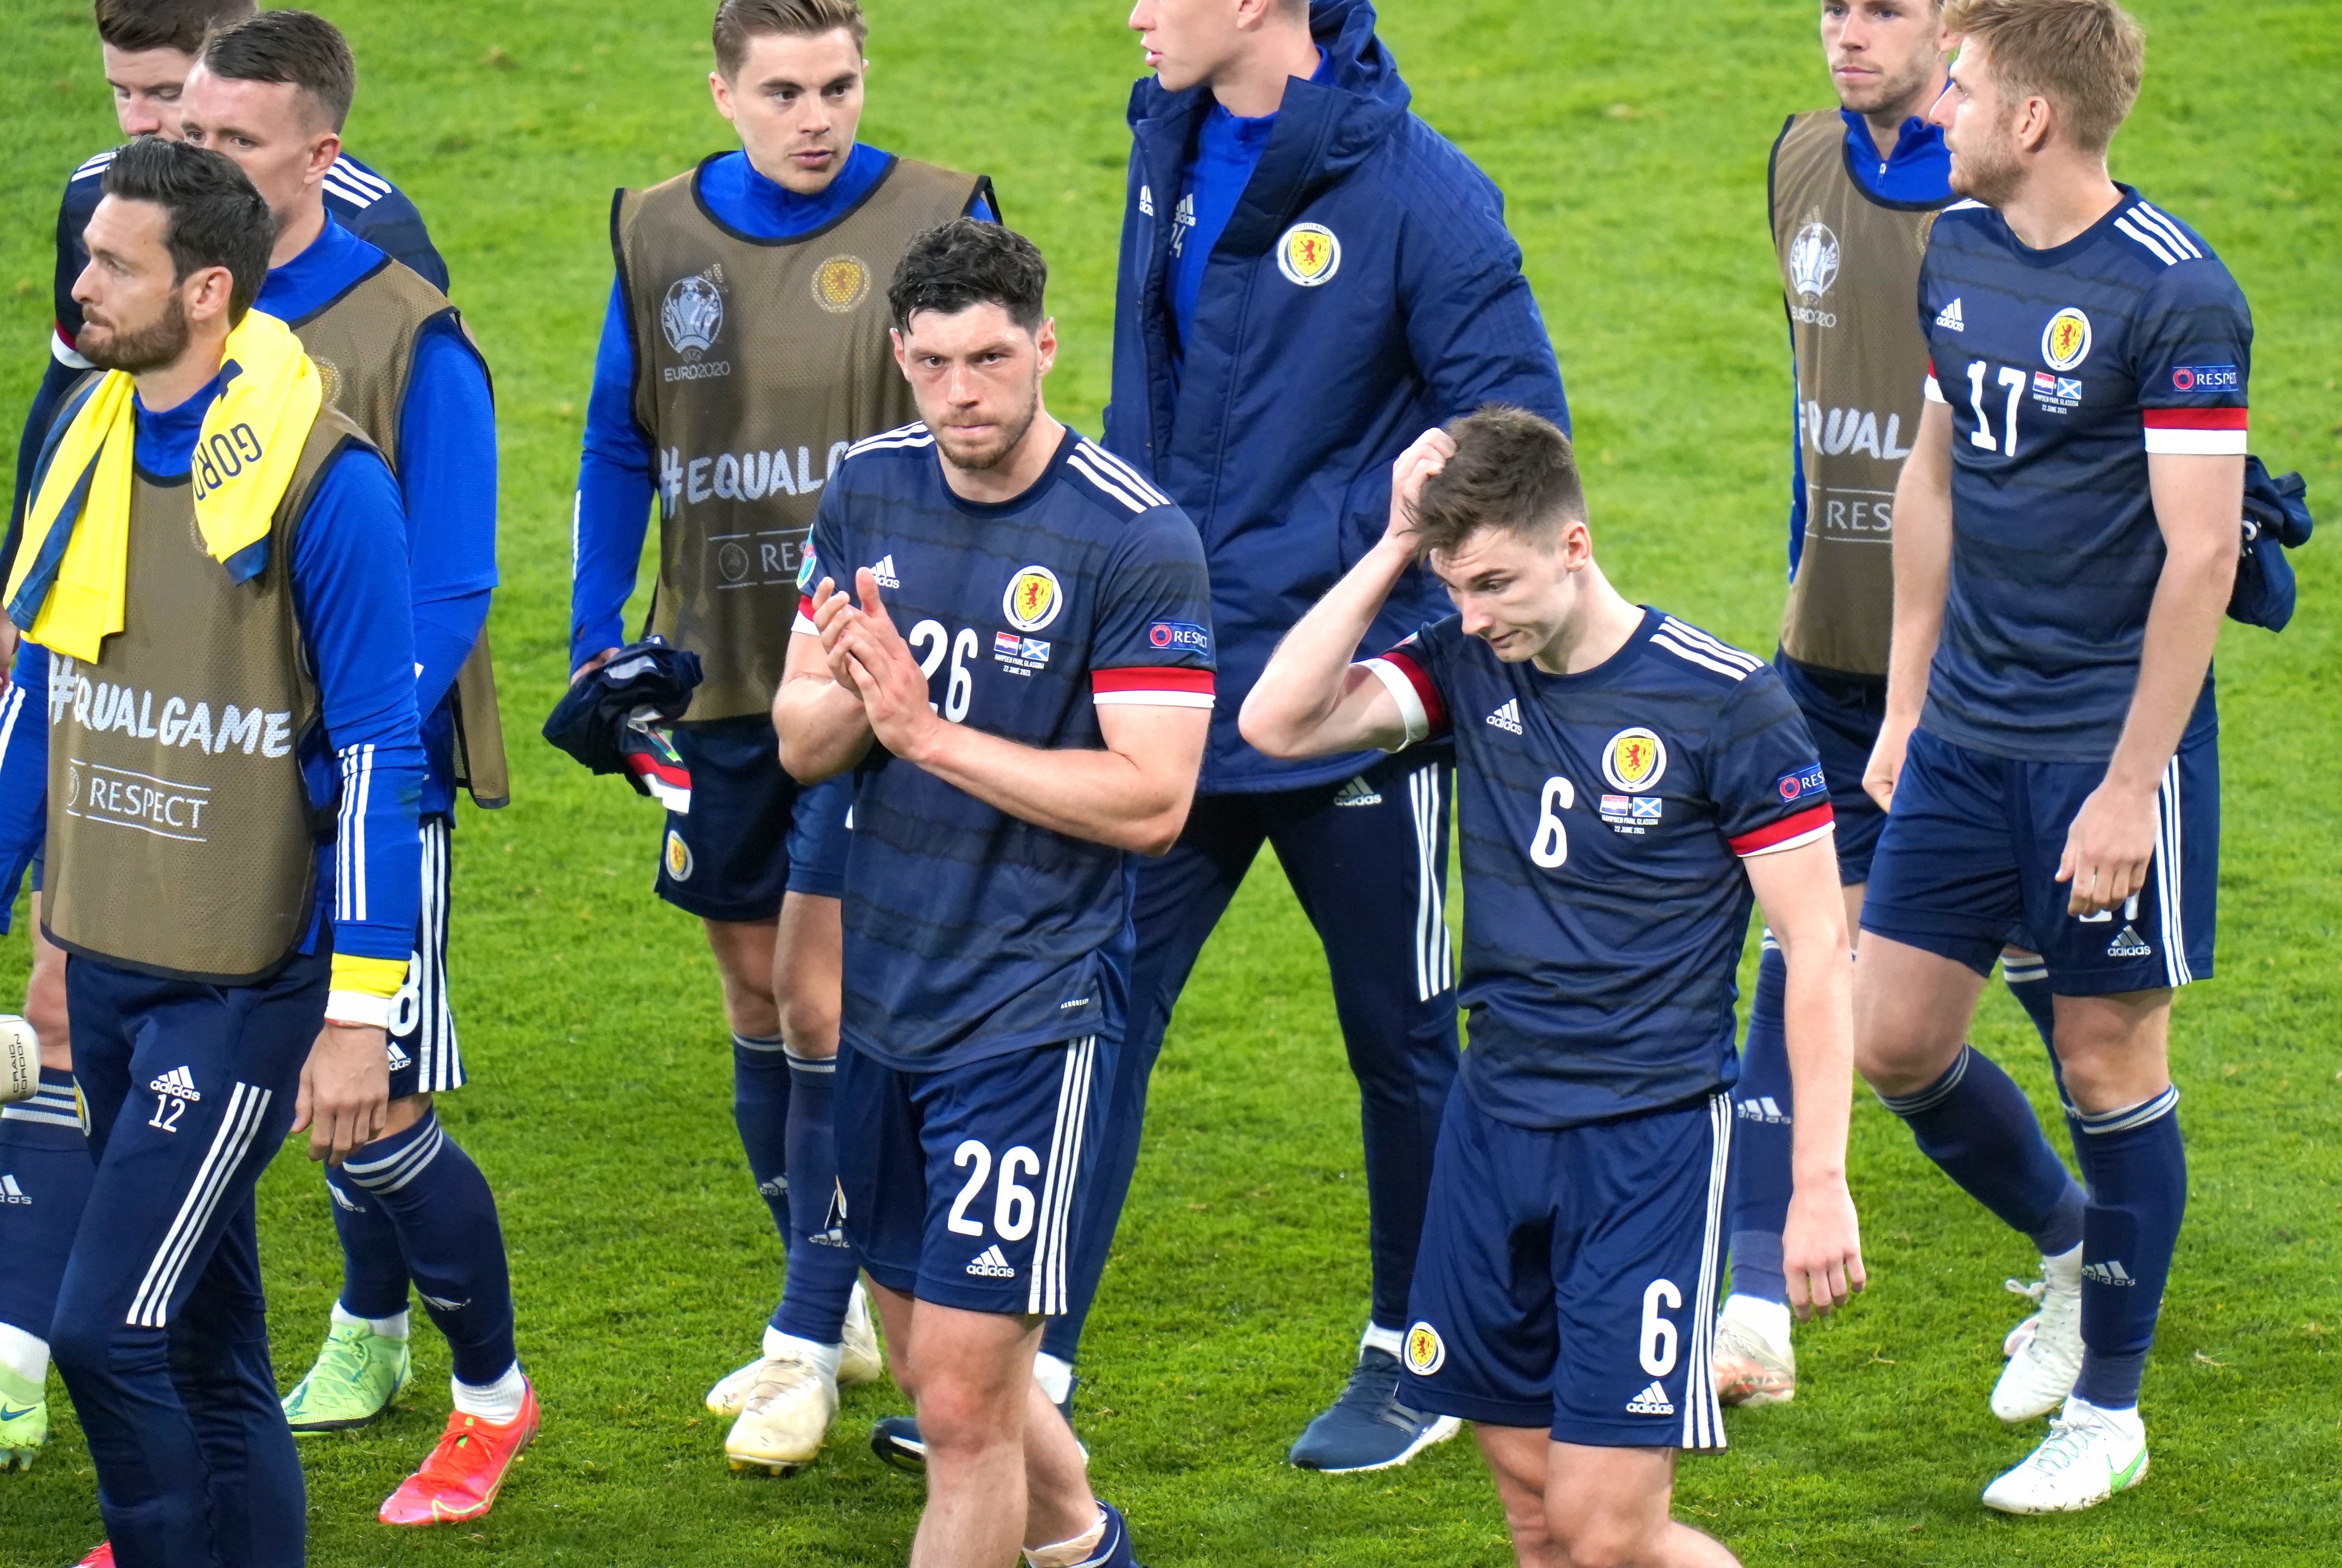 Scotland bowed out of Euro 2020 at Hampden Park last night